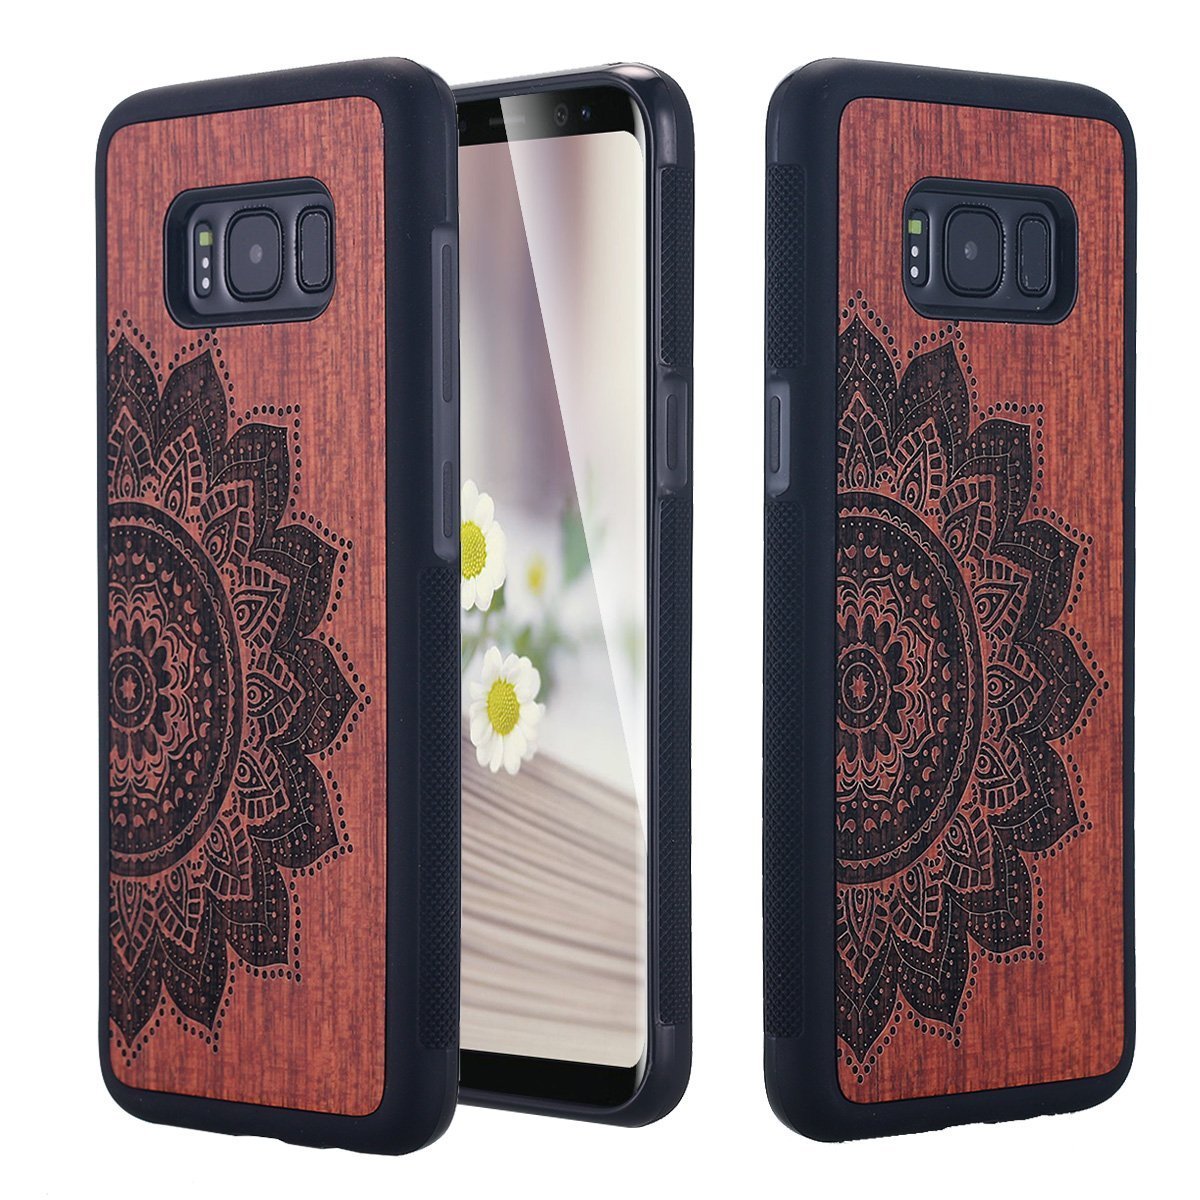 Galaxy S8 and S8 Plus cases